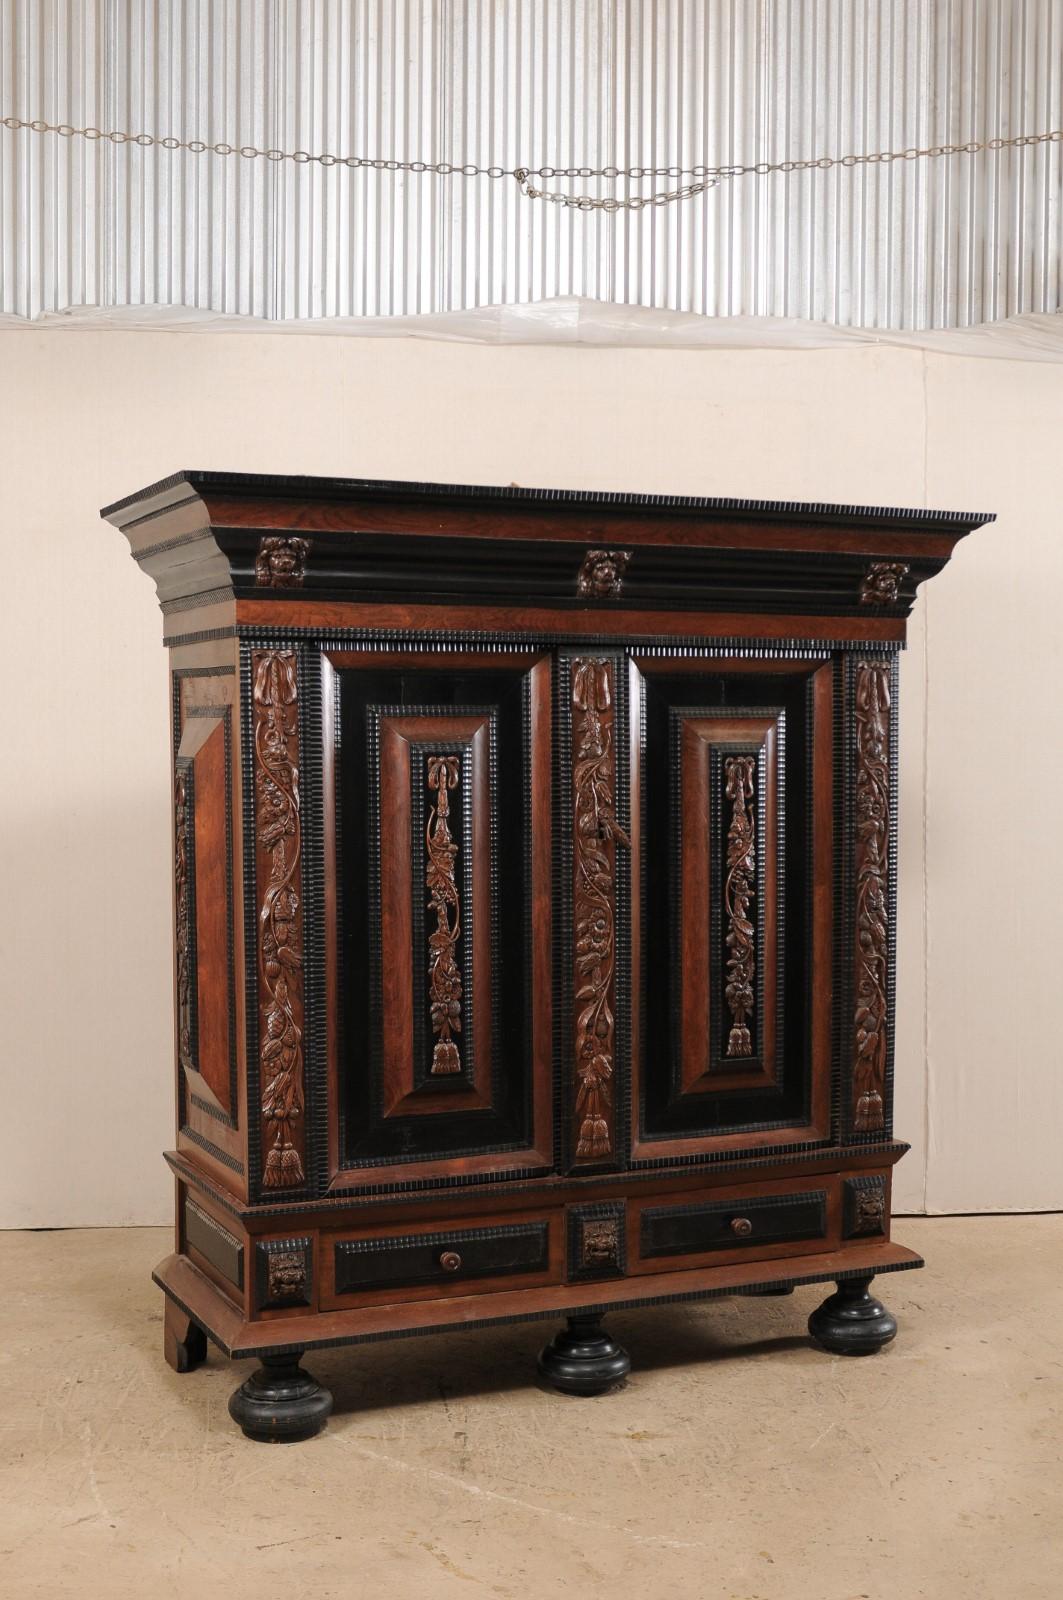 Swedish 18th Century Period Baroque Kas Wardrobe Cabinet with Rich Carved Wood Details For Sale